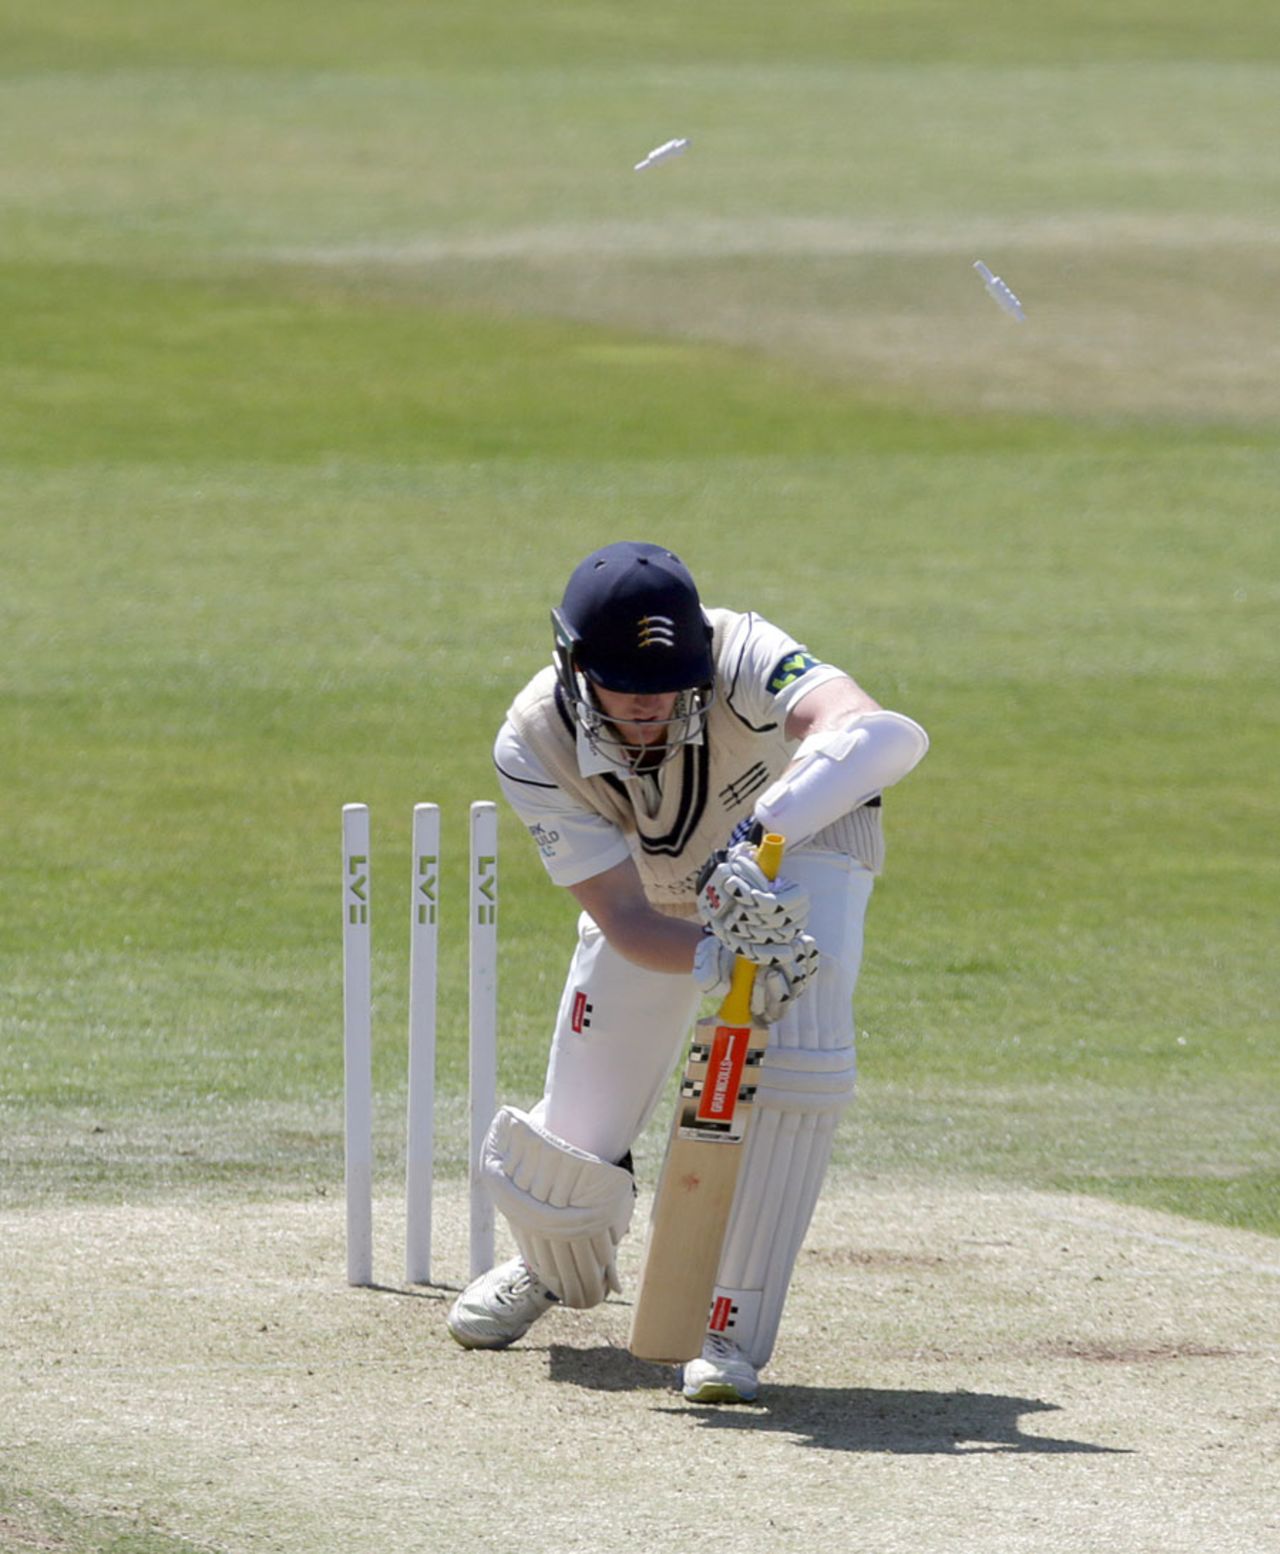 Sam Robson was bowled by Jack Brooks for 41, Yorkshire v Middlesex, County Championship, Division One, Headingley, 1st day, June 7, 2015